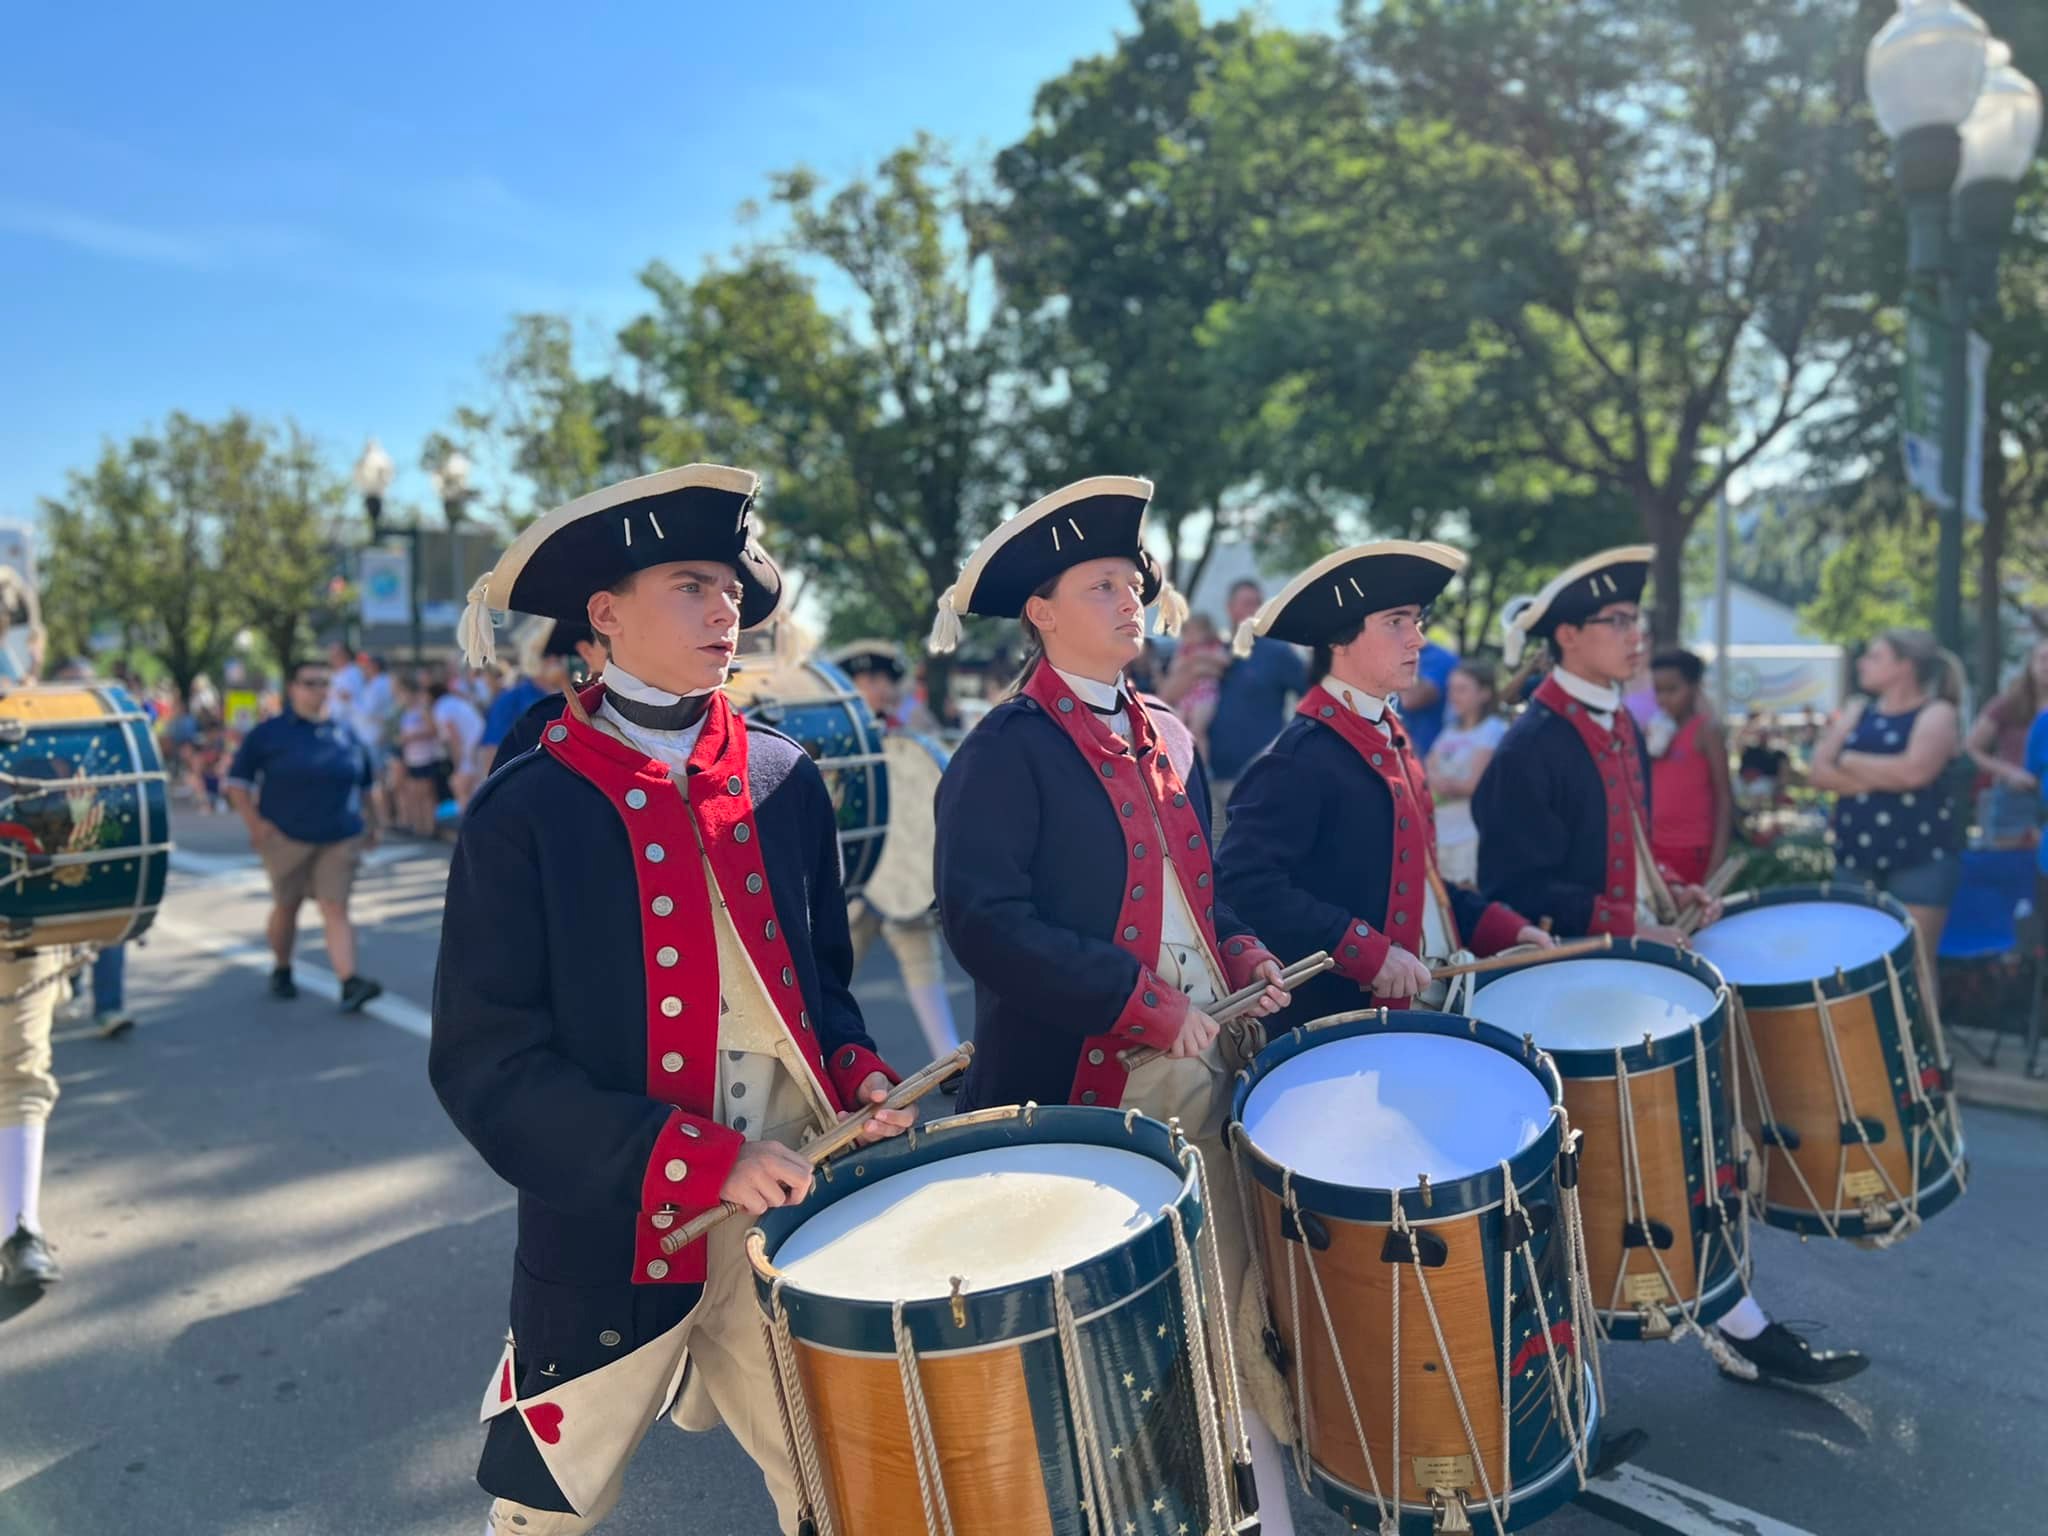 Tars and Bendirs – Cooperman Fife and Drums